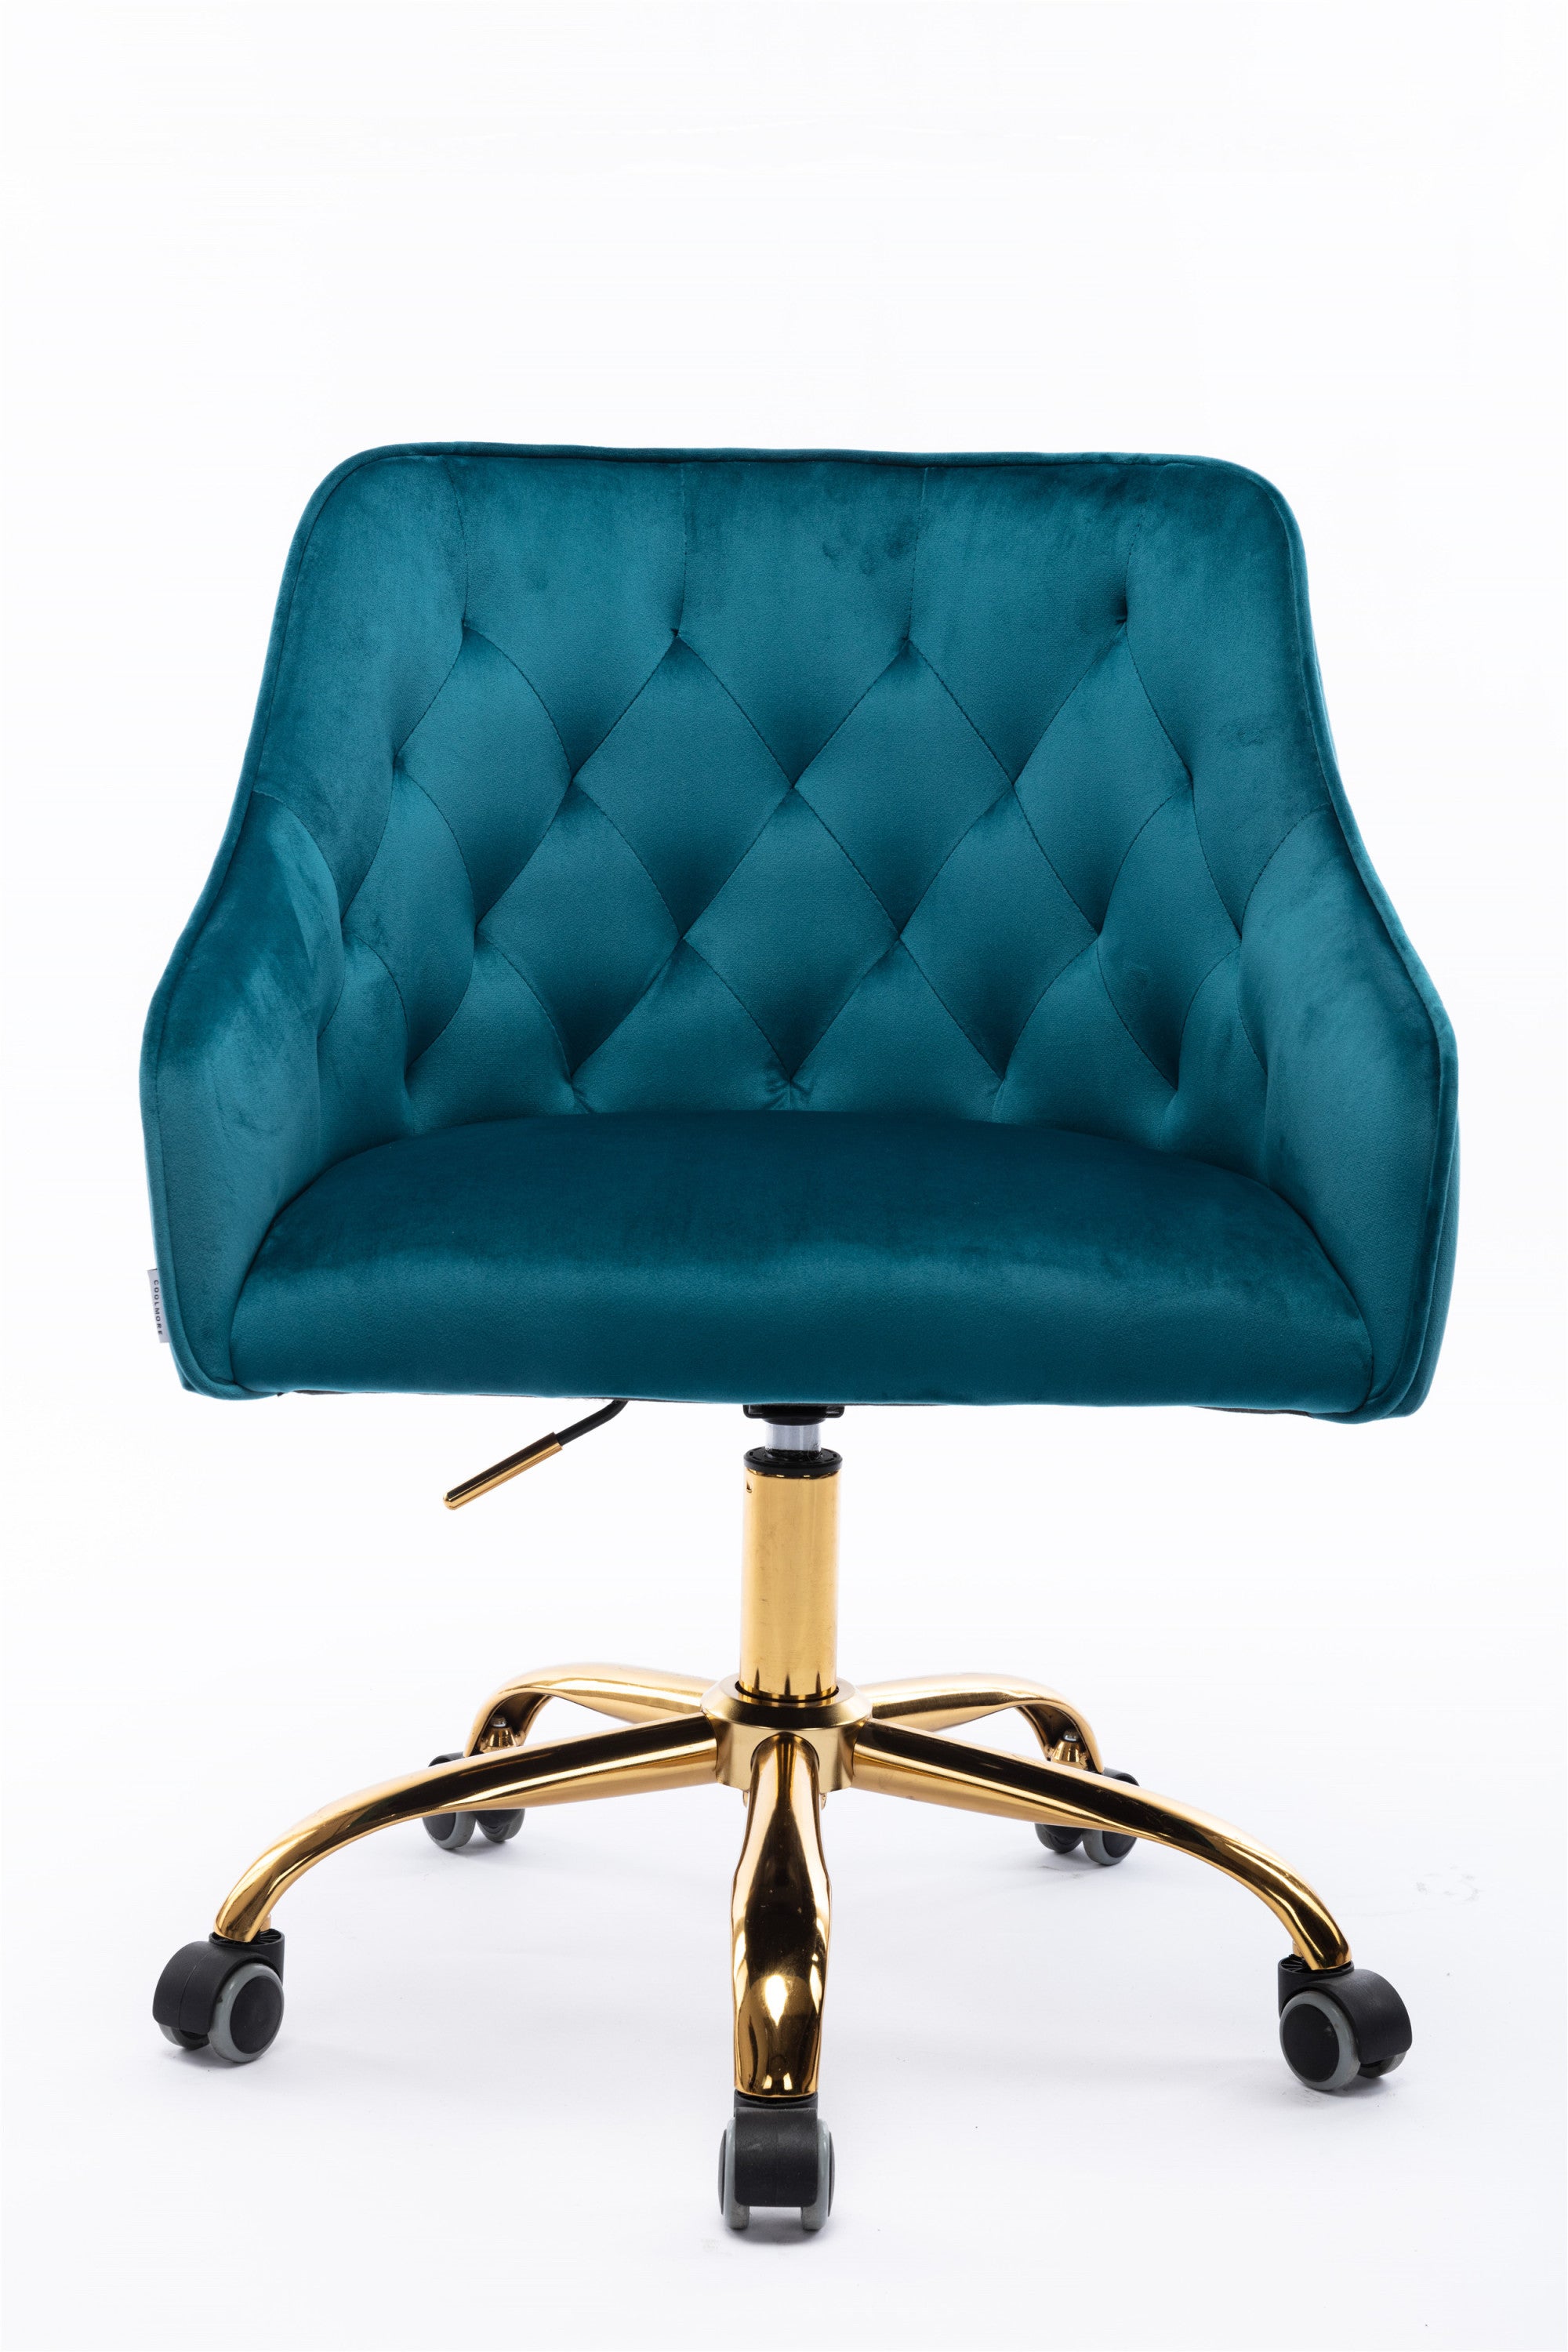 COOLMORE Shell Swivel Chair (Teal)